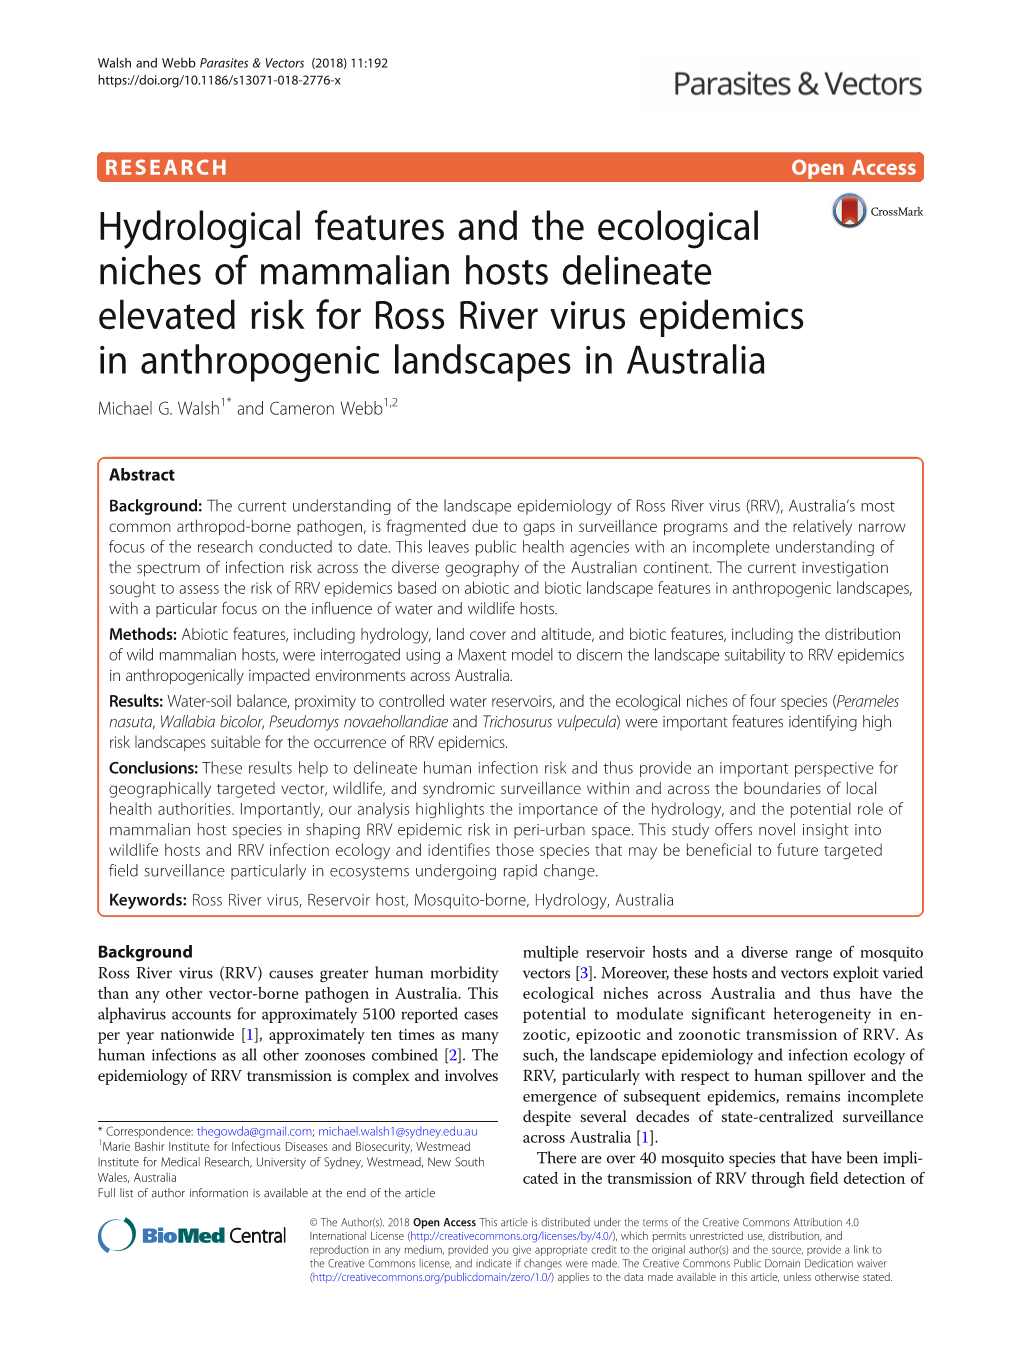 Hydrological Features and the Ecological Niches of Mammalian